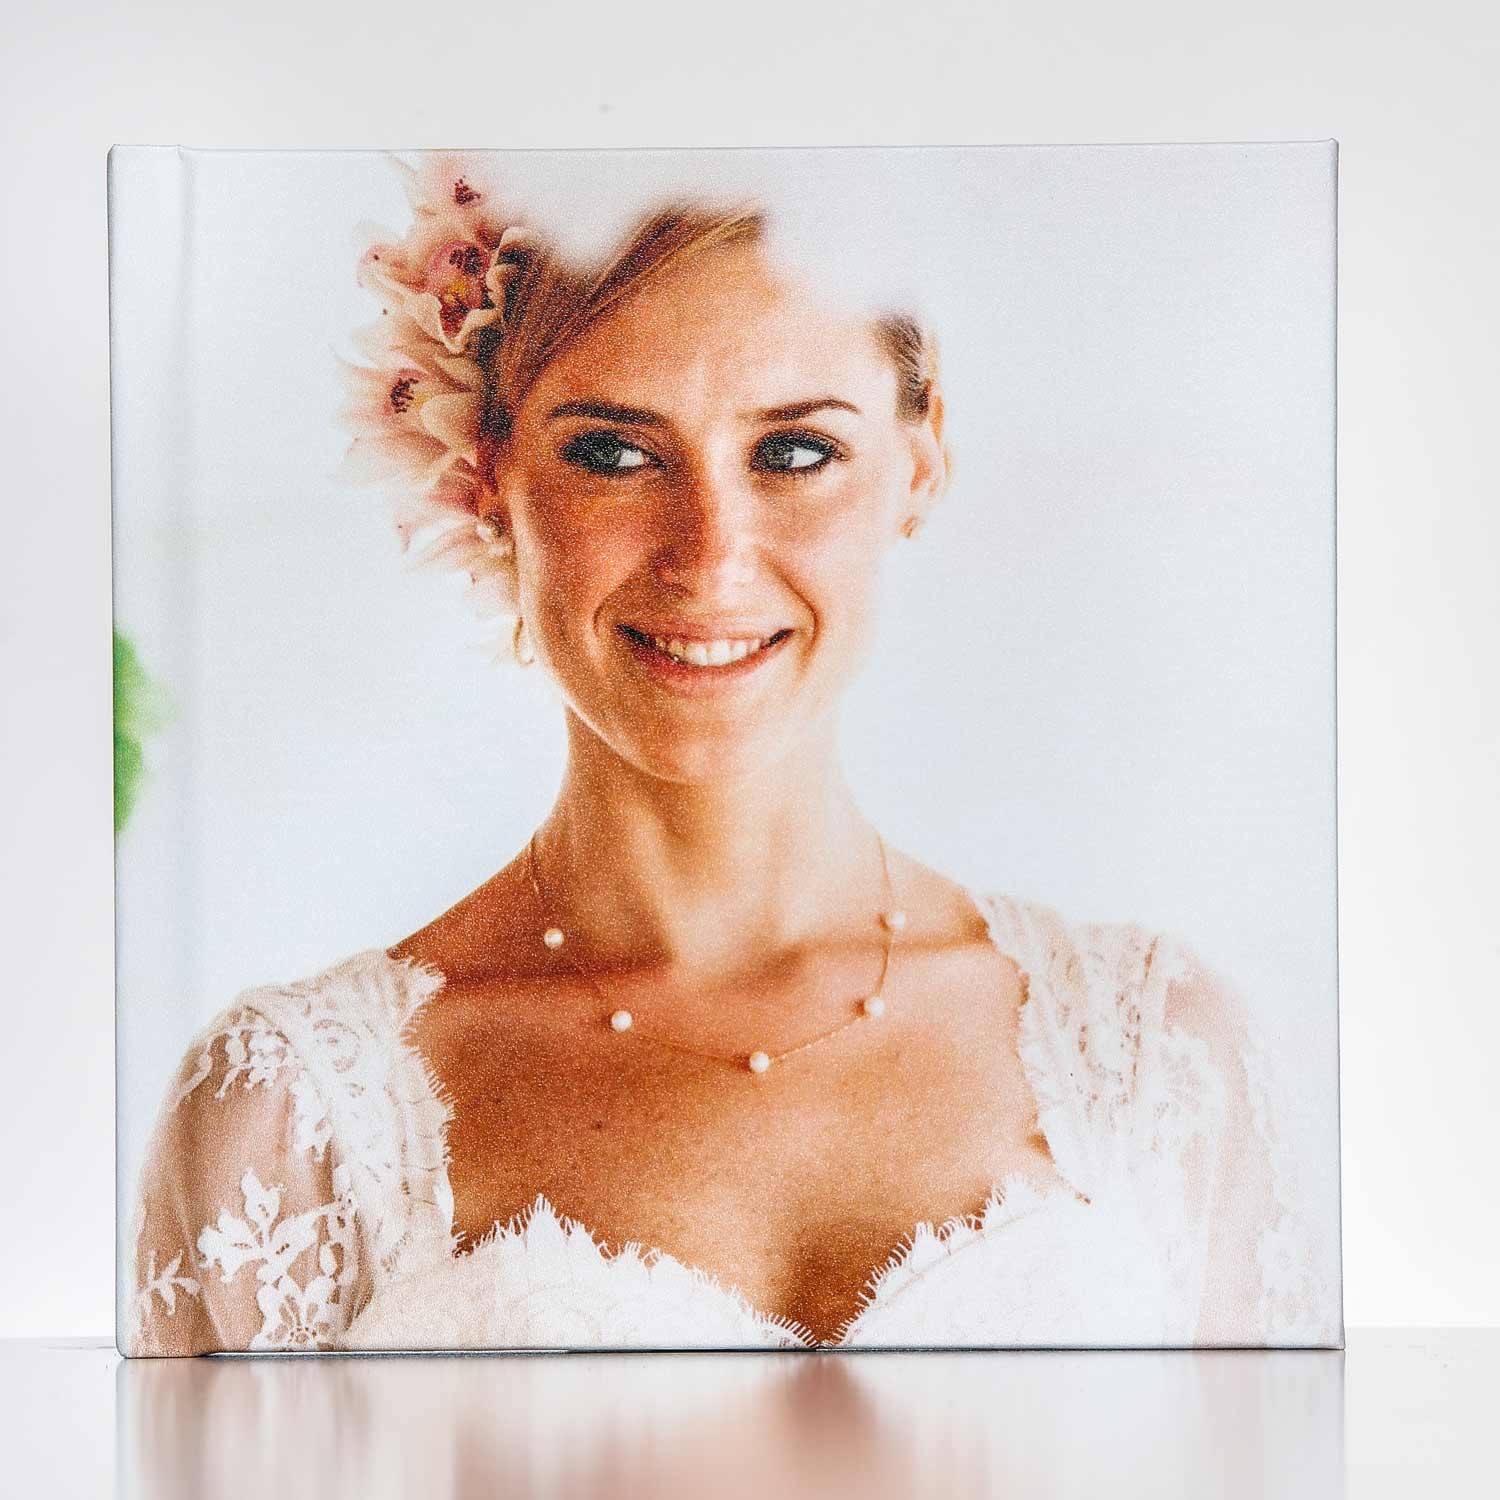 Silverbook 20x20cm with Photo Cover